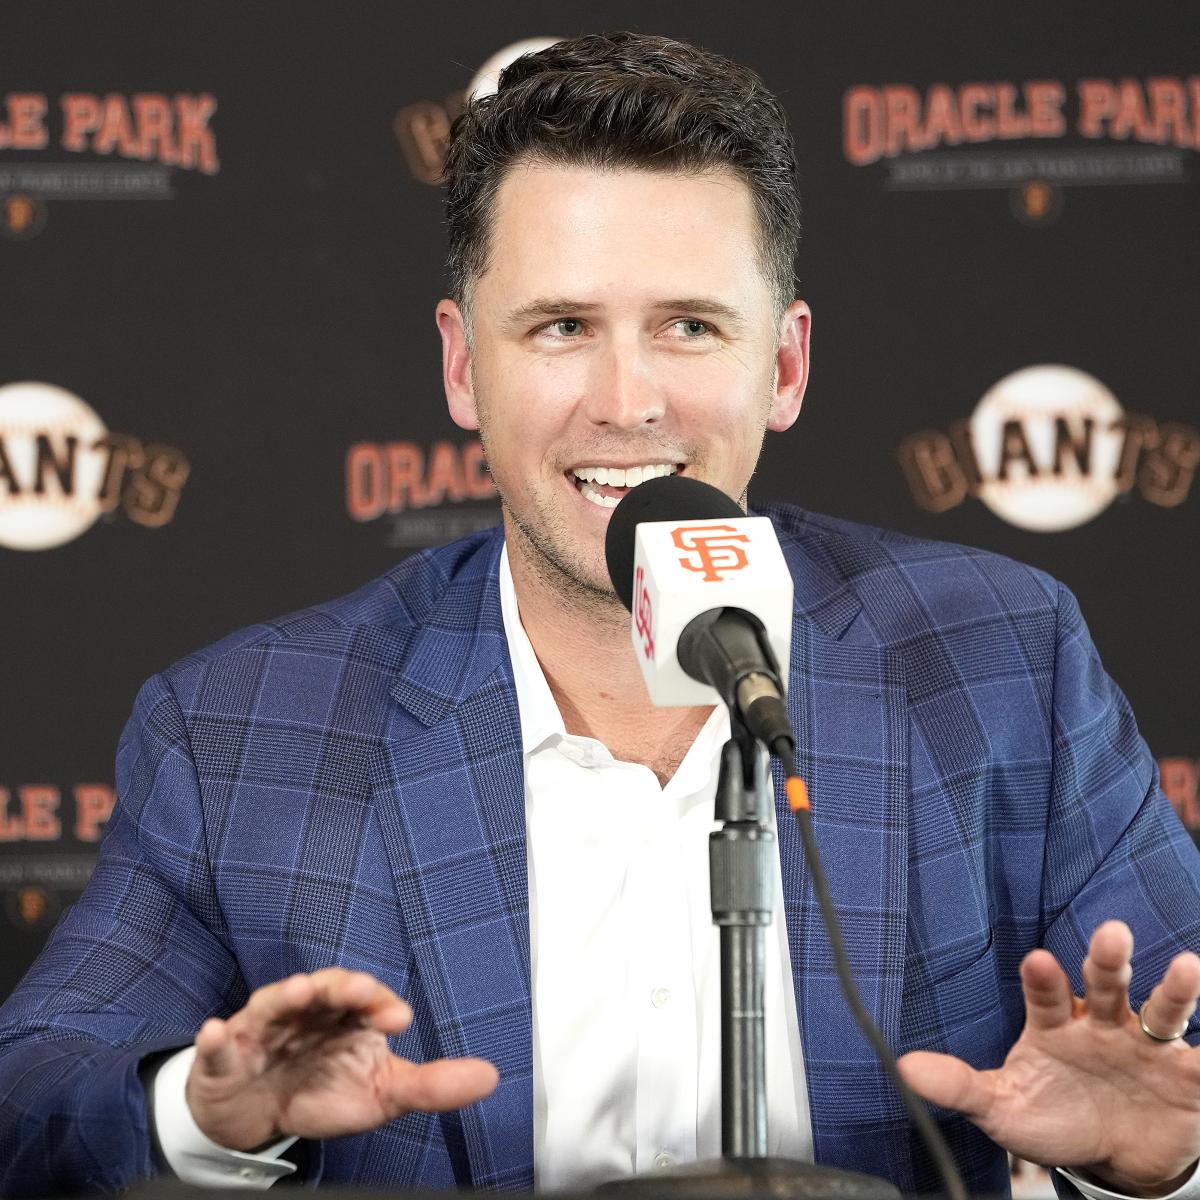 Buster Posey way ahead in National League All-Star voting – The Mercury News